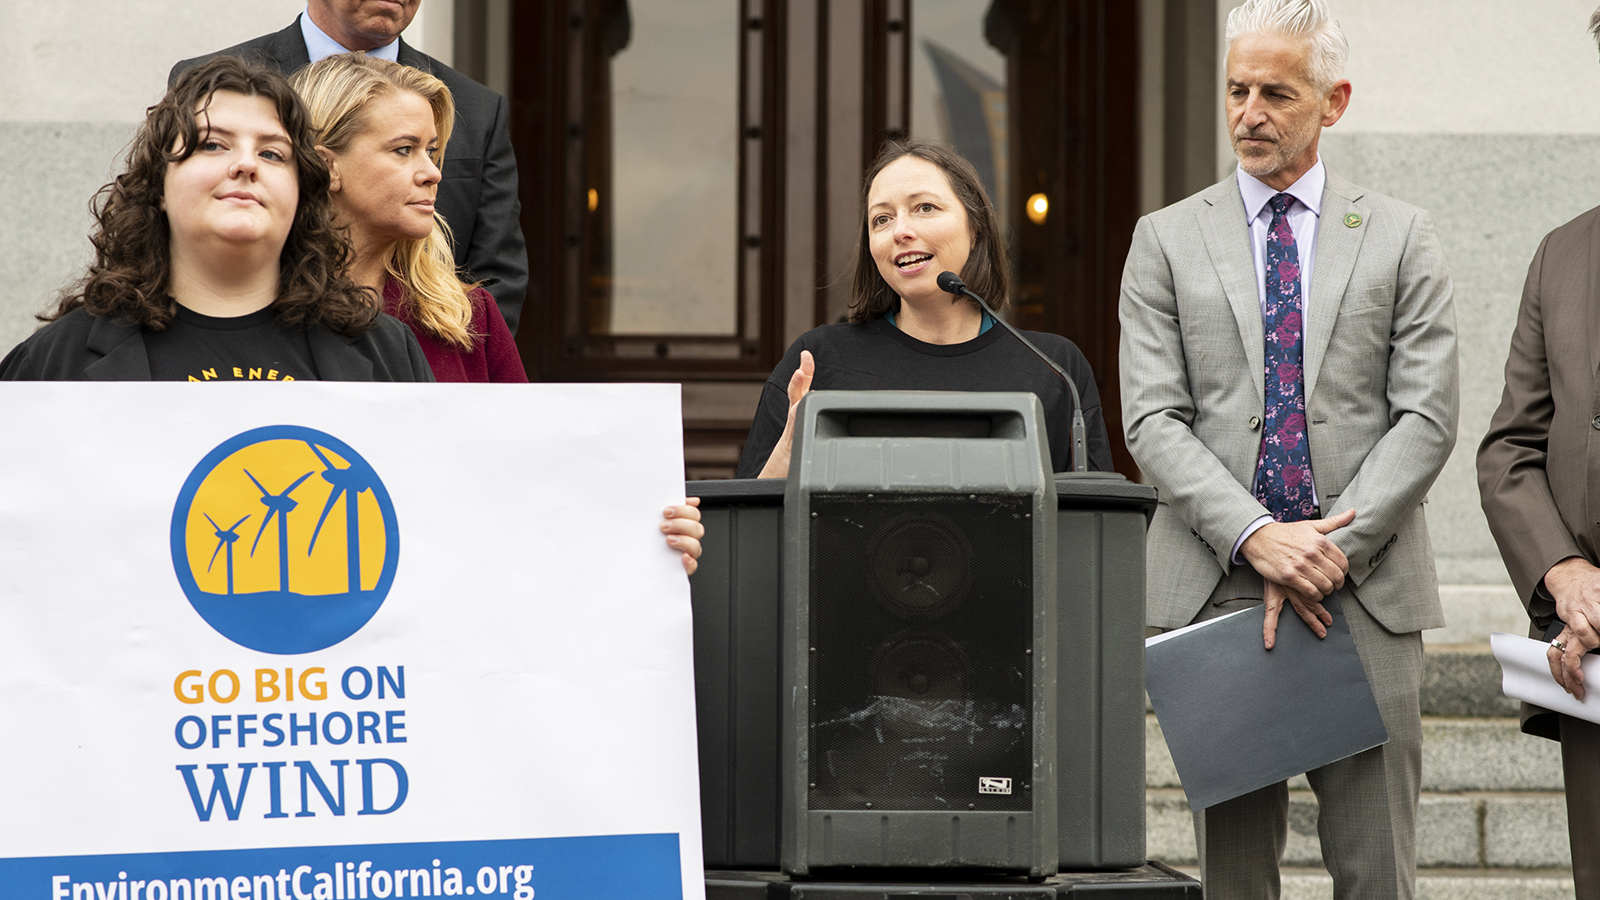 Environment California’s Laura Deehan spoke at an event to announce a bill to create a $1 billion bond for offshore wind ports in California.